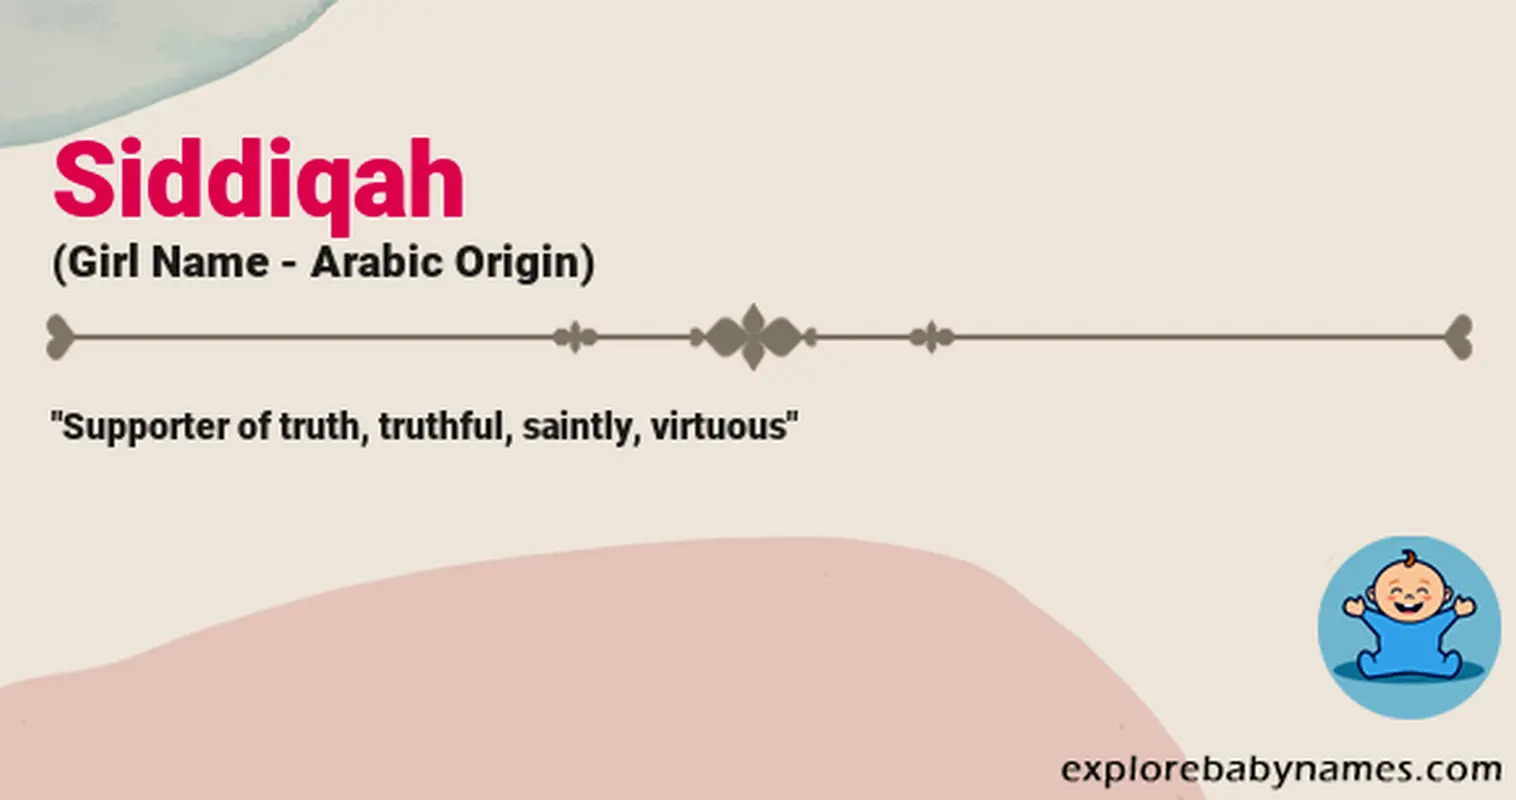 Meaning of Siddiqah